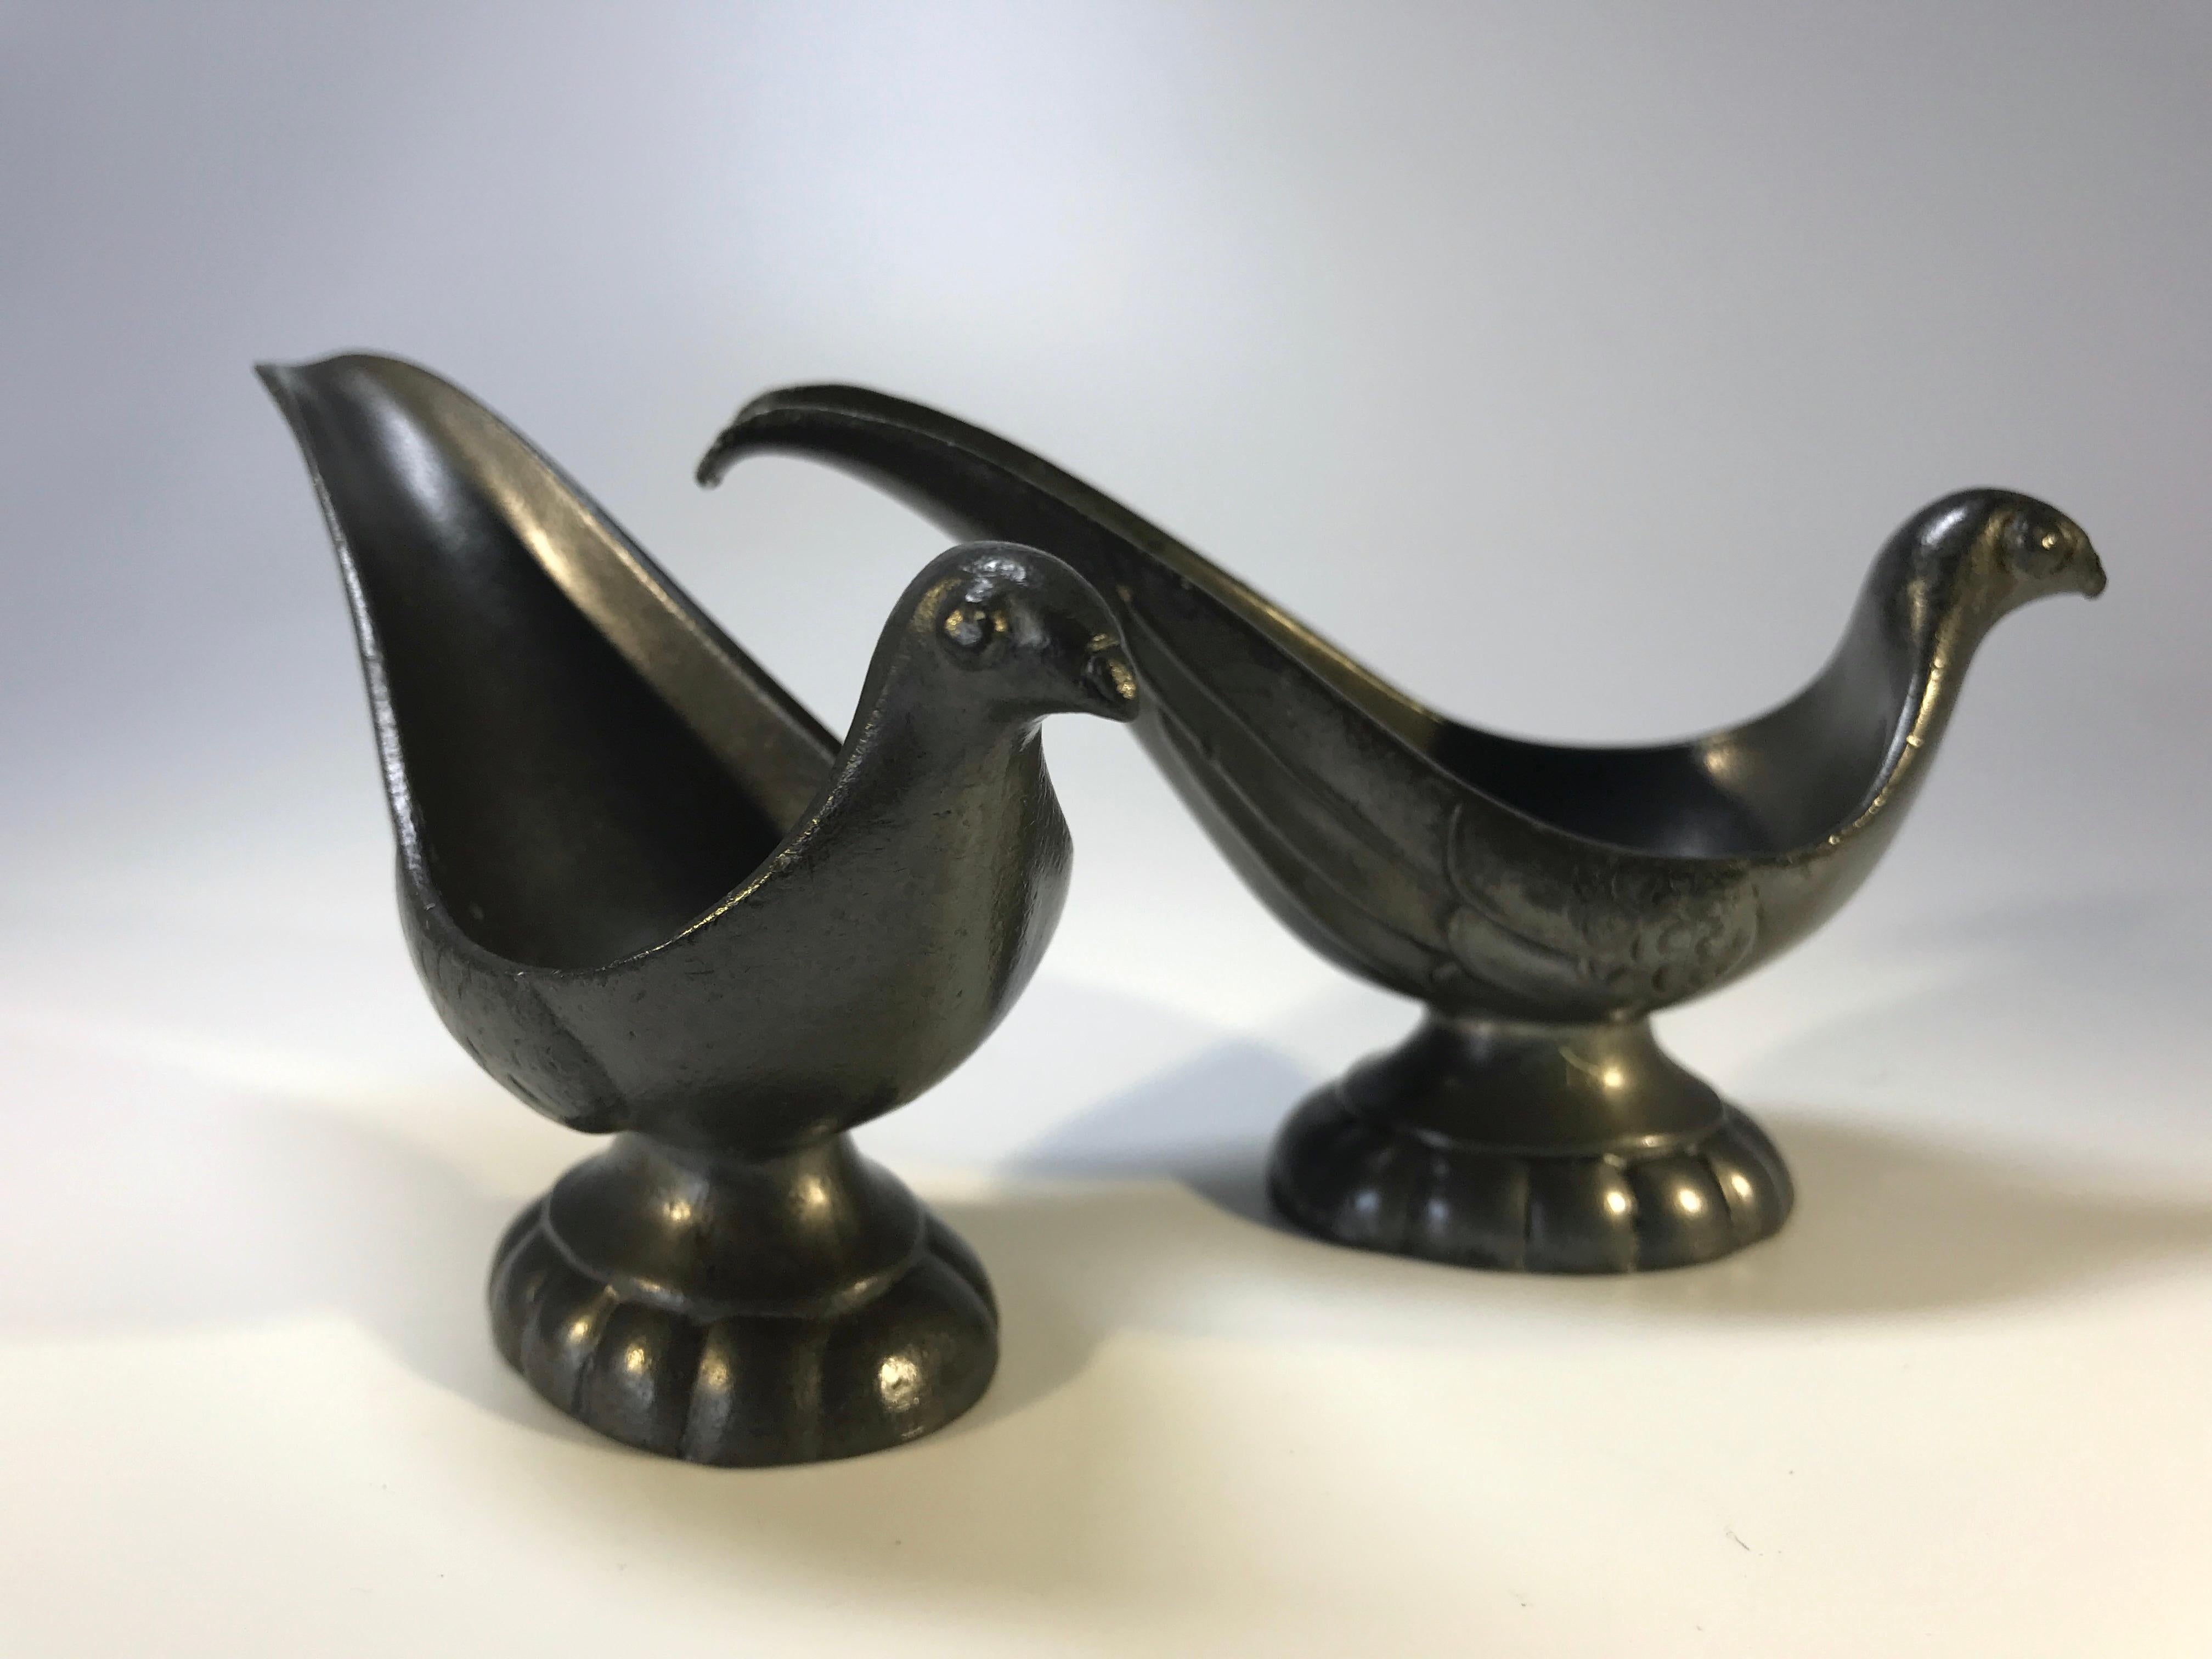 Pair of Just Andersen of Denmark, Pewter stylised bird pipe holders 
Although a pair, they are not identical - each has it's own characteristics
Circa 1930's
Stamped on each base
Measures: Height 2.5 inch, width 4.25 inch, depth 1.5 inch
Good